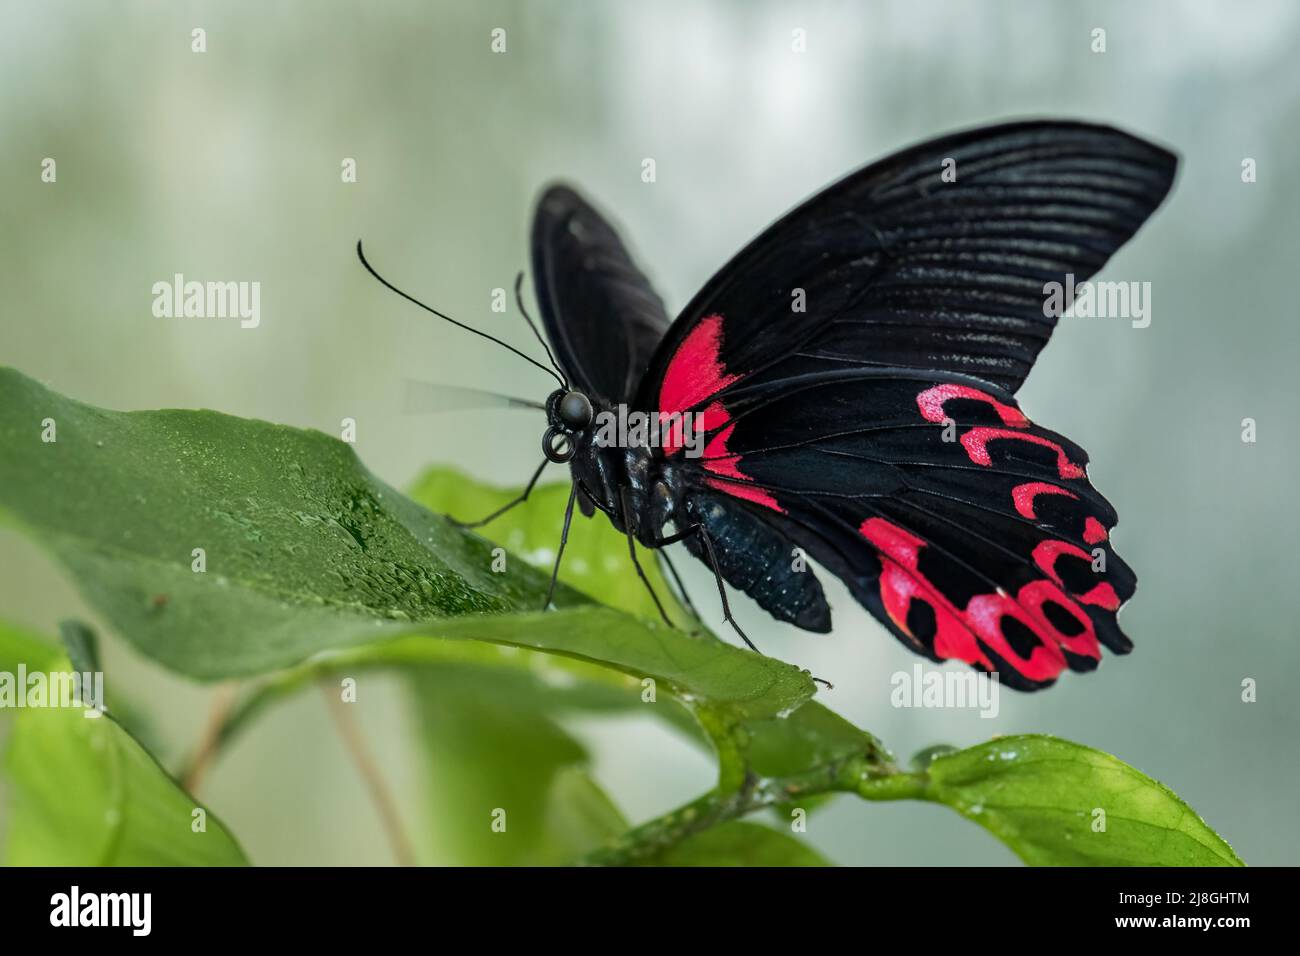 Scarlet Mormon butterfly - Papilio deiphobus rumanzovia, beautiful large colored butterfly from Southeast Asian forests and gardens, Sulawesi. Stock Photo